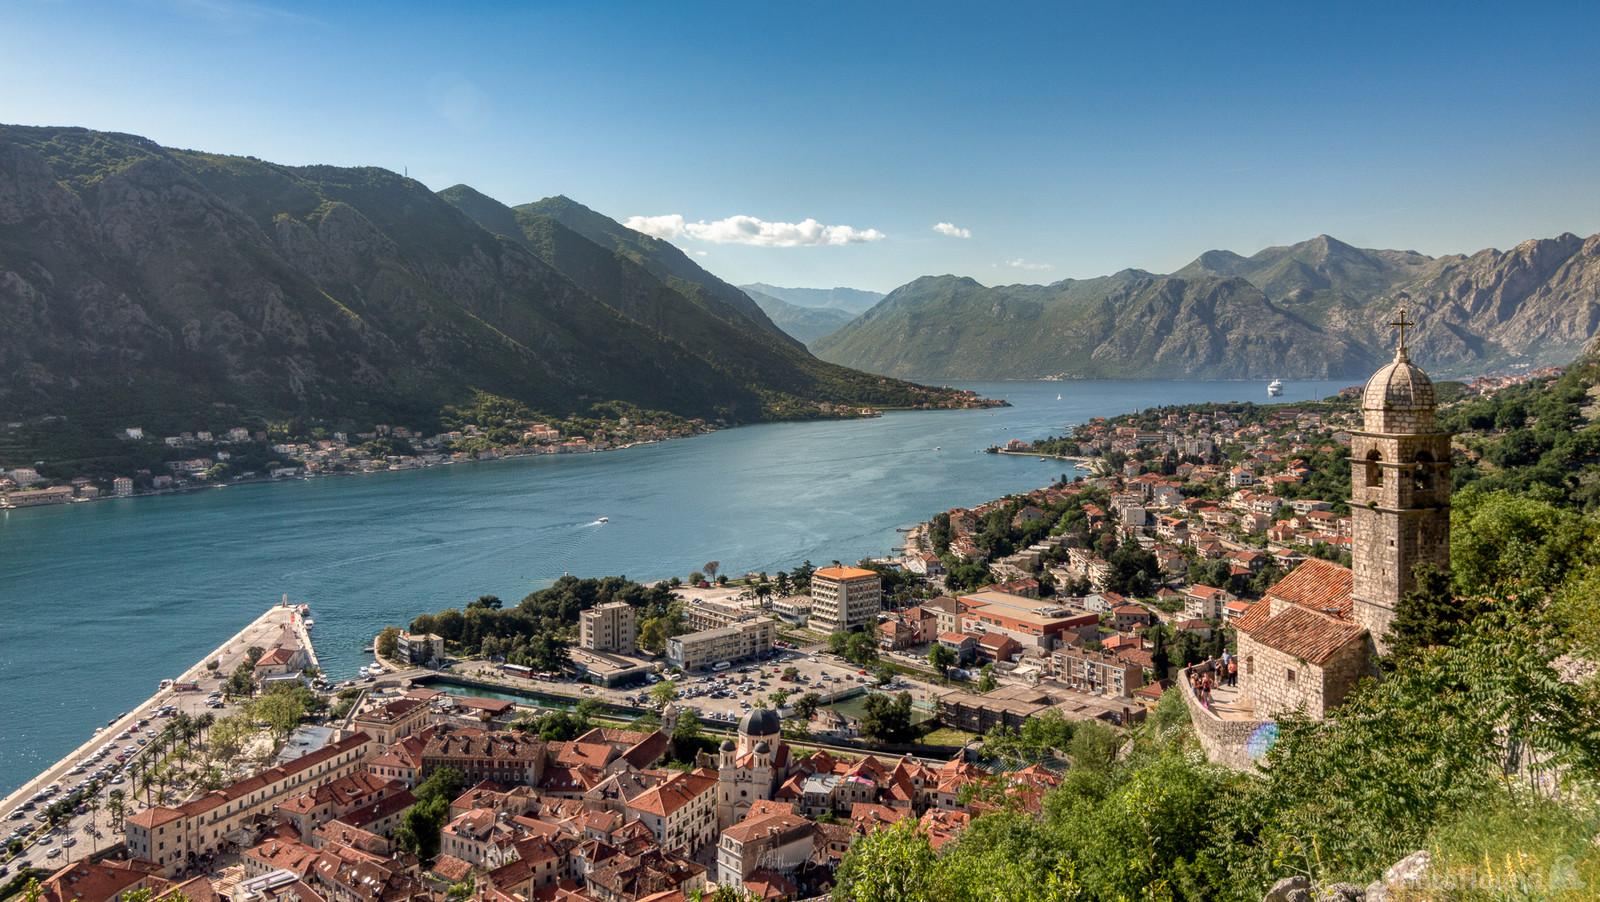 Image of Kotor Our Lady of Health  by Mathew Browne